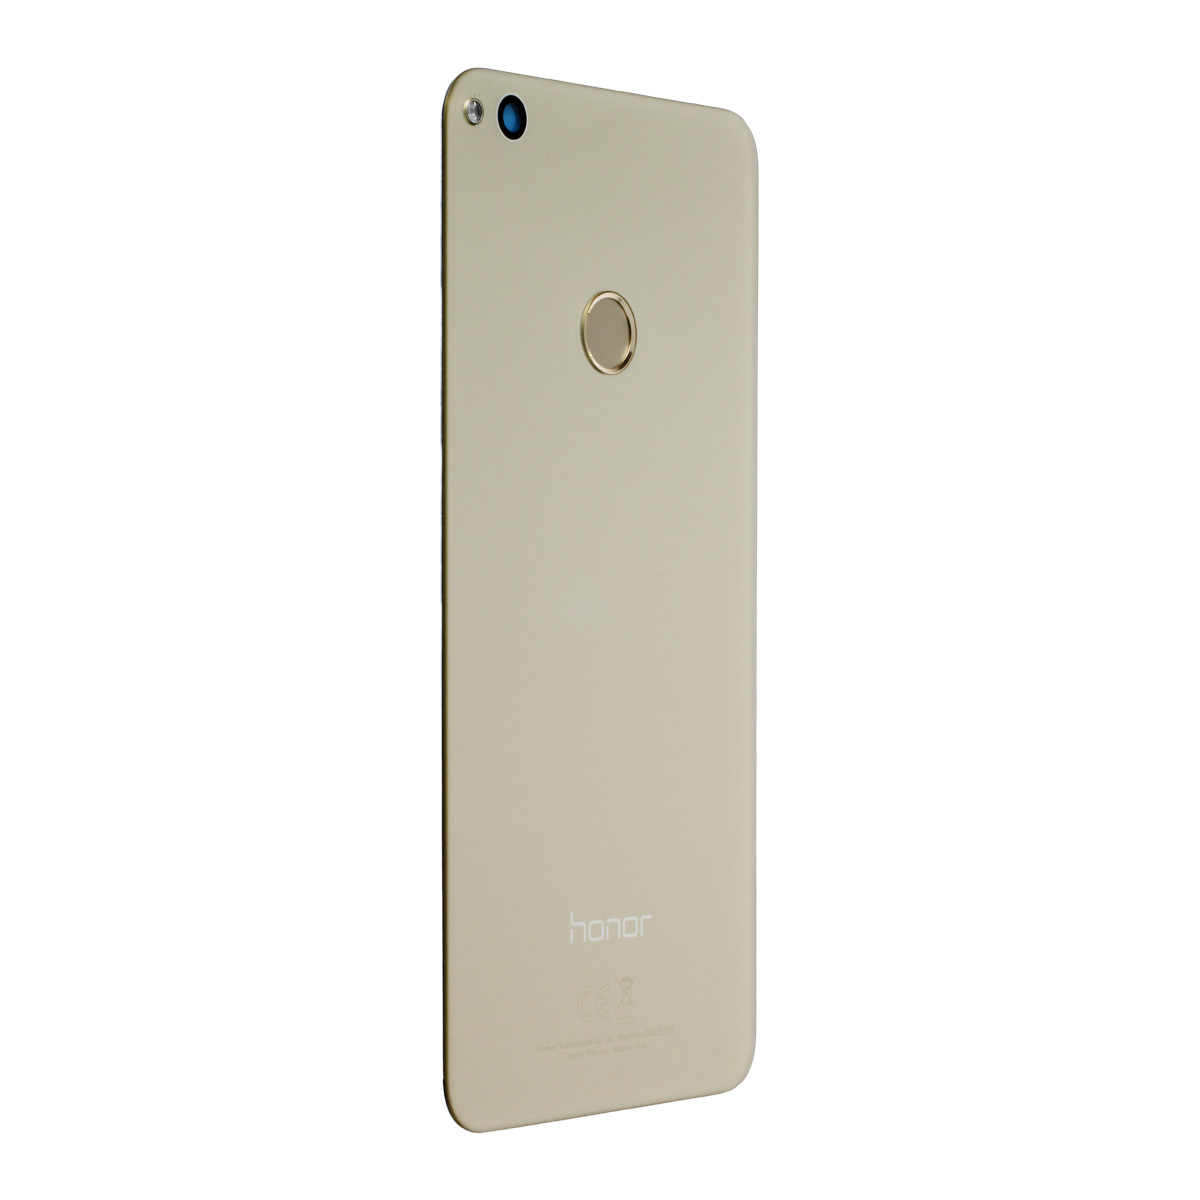 Huawei Honor 8 lite Battery Cover, Gold